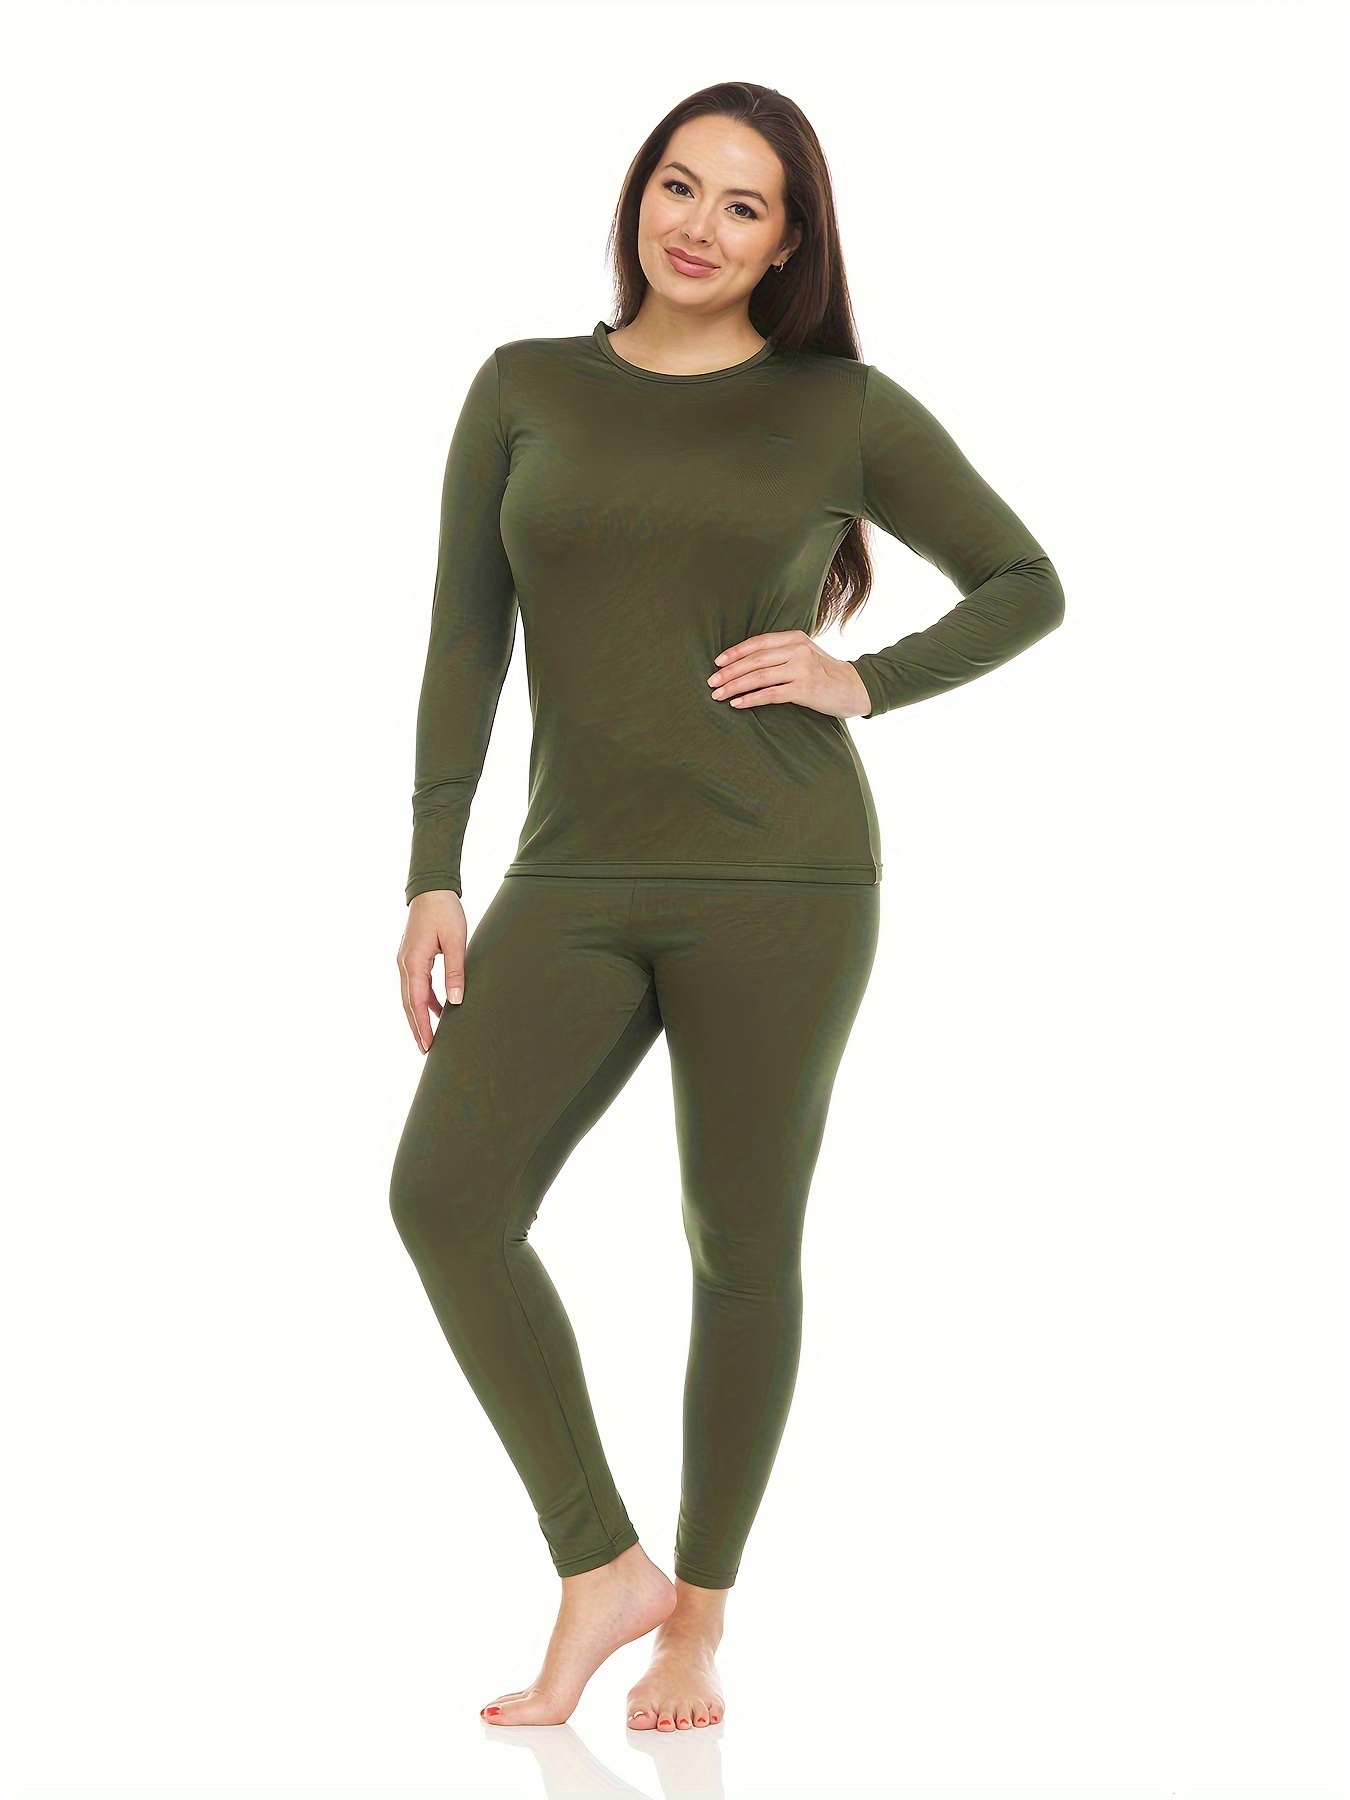 Thermal Womens Shirts Long Sleeve Ladies Thermals Top And Bottom